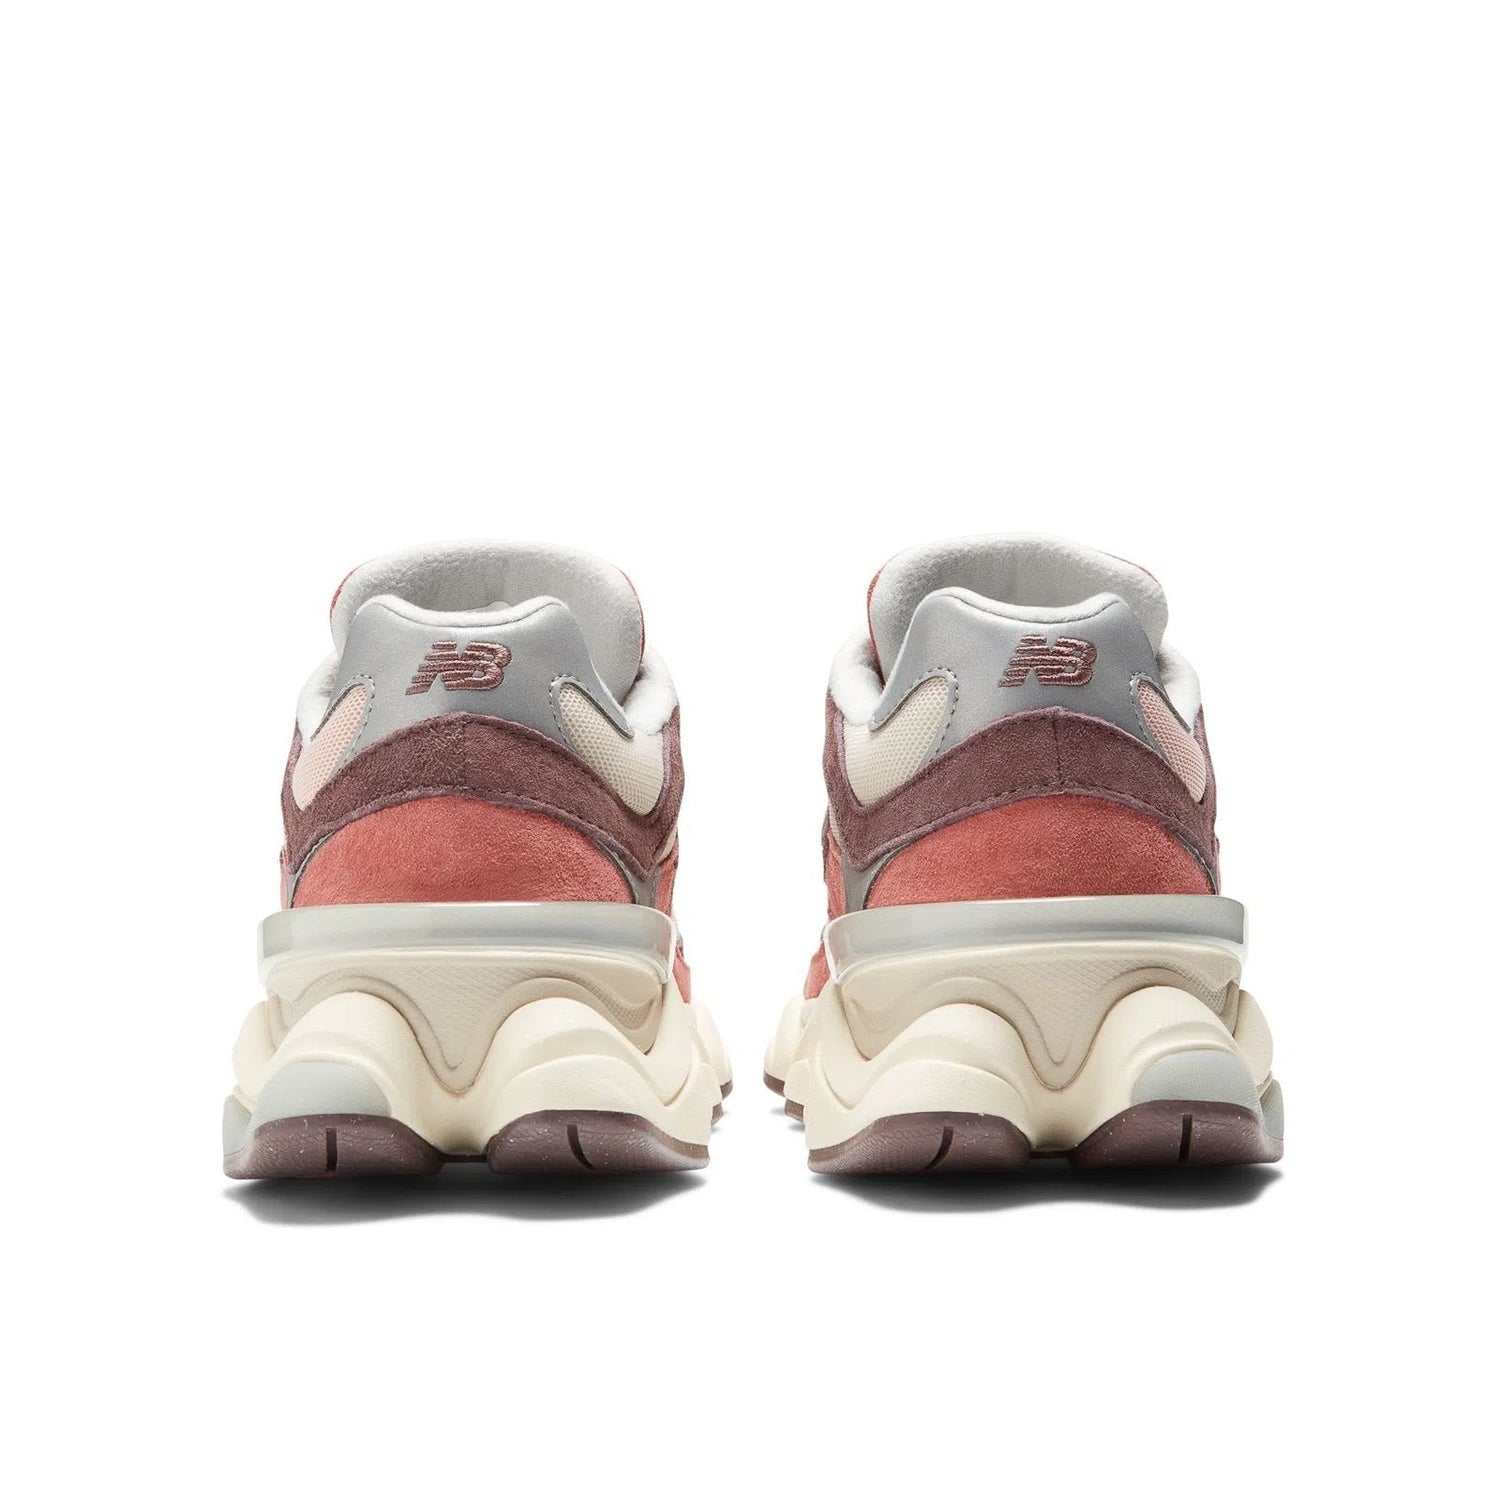 New Balance Mineral Red with Truffle and Rain Cloud-LOTABY